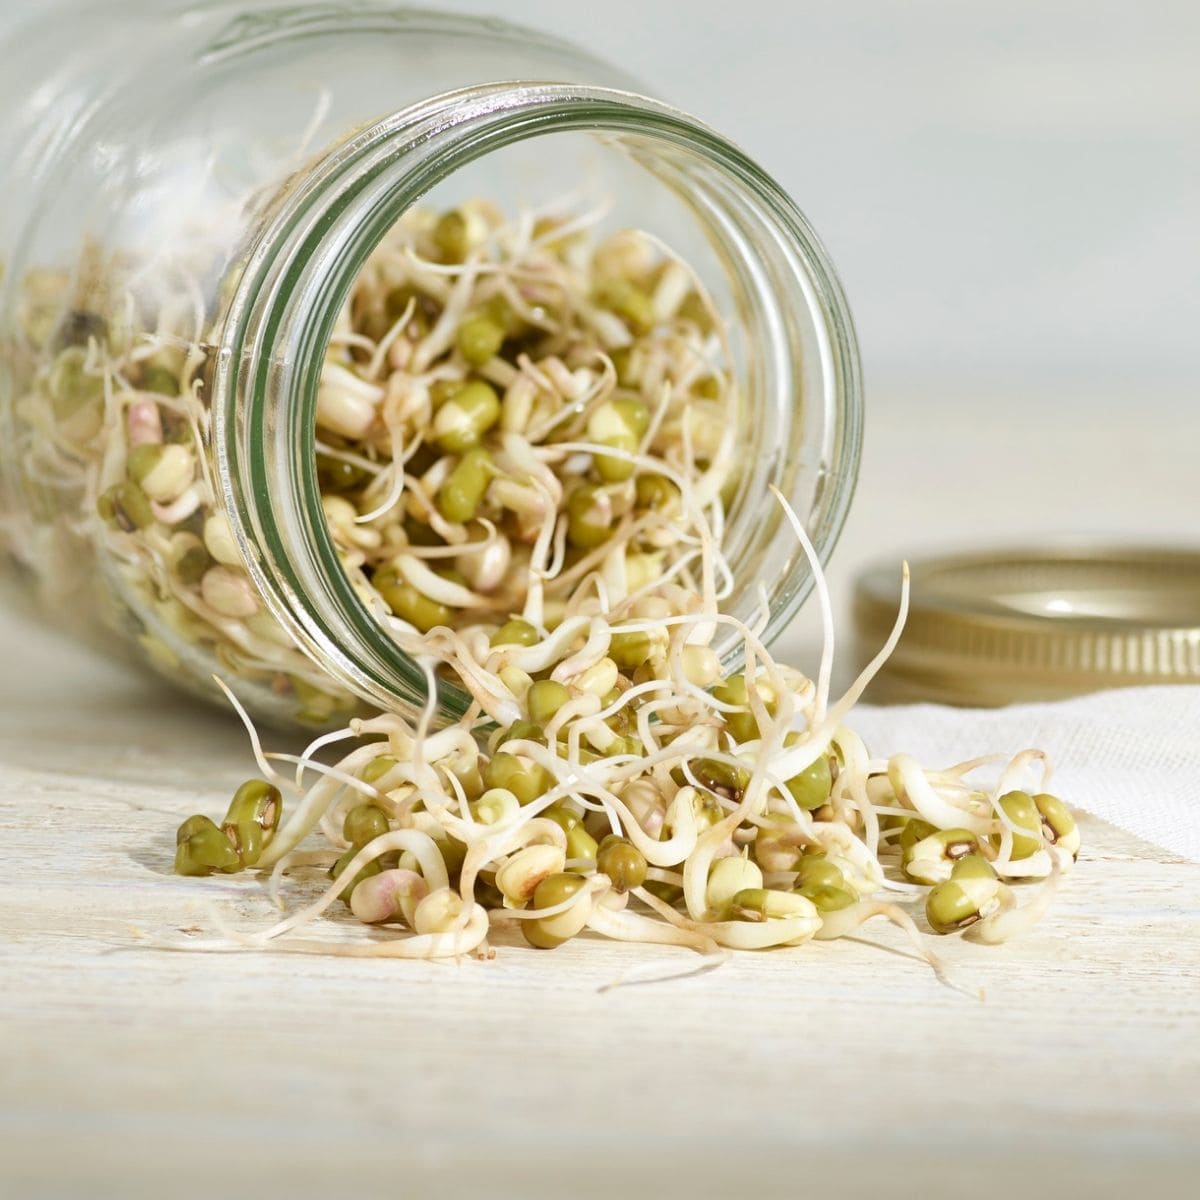 https://www.attainable-sustainable.net/wp-content/uploads/2019/10/bean-sprouts-1-1.jpg